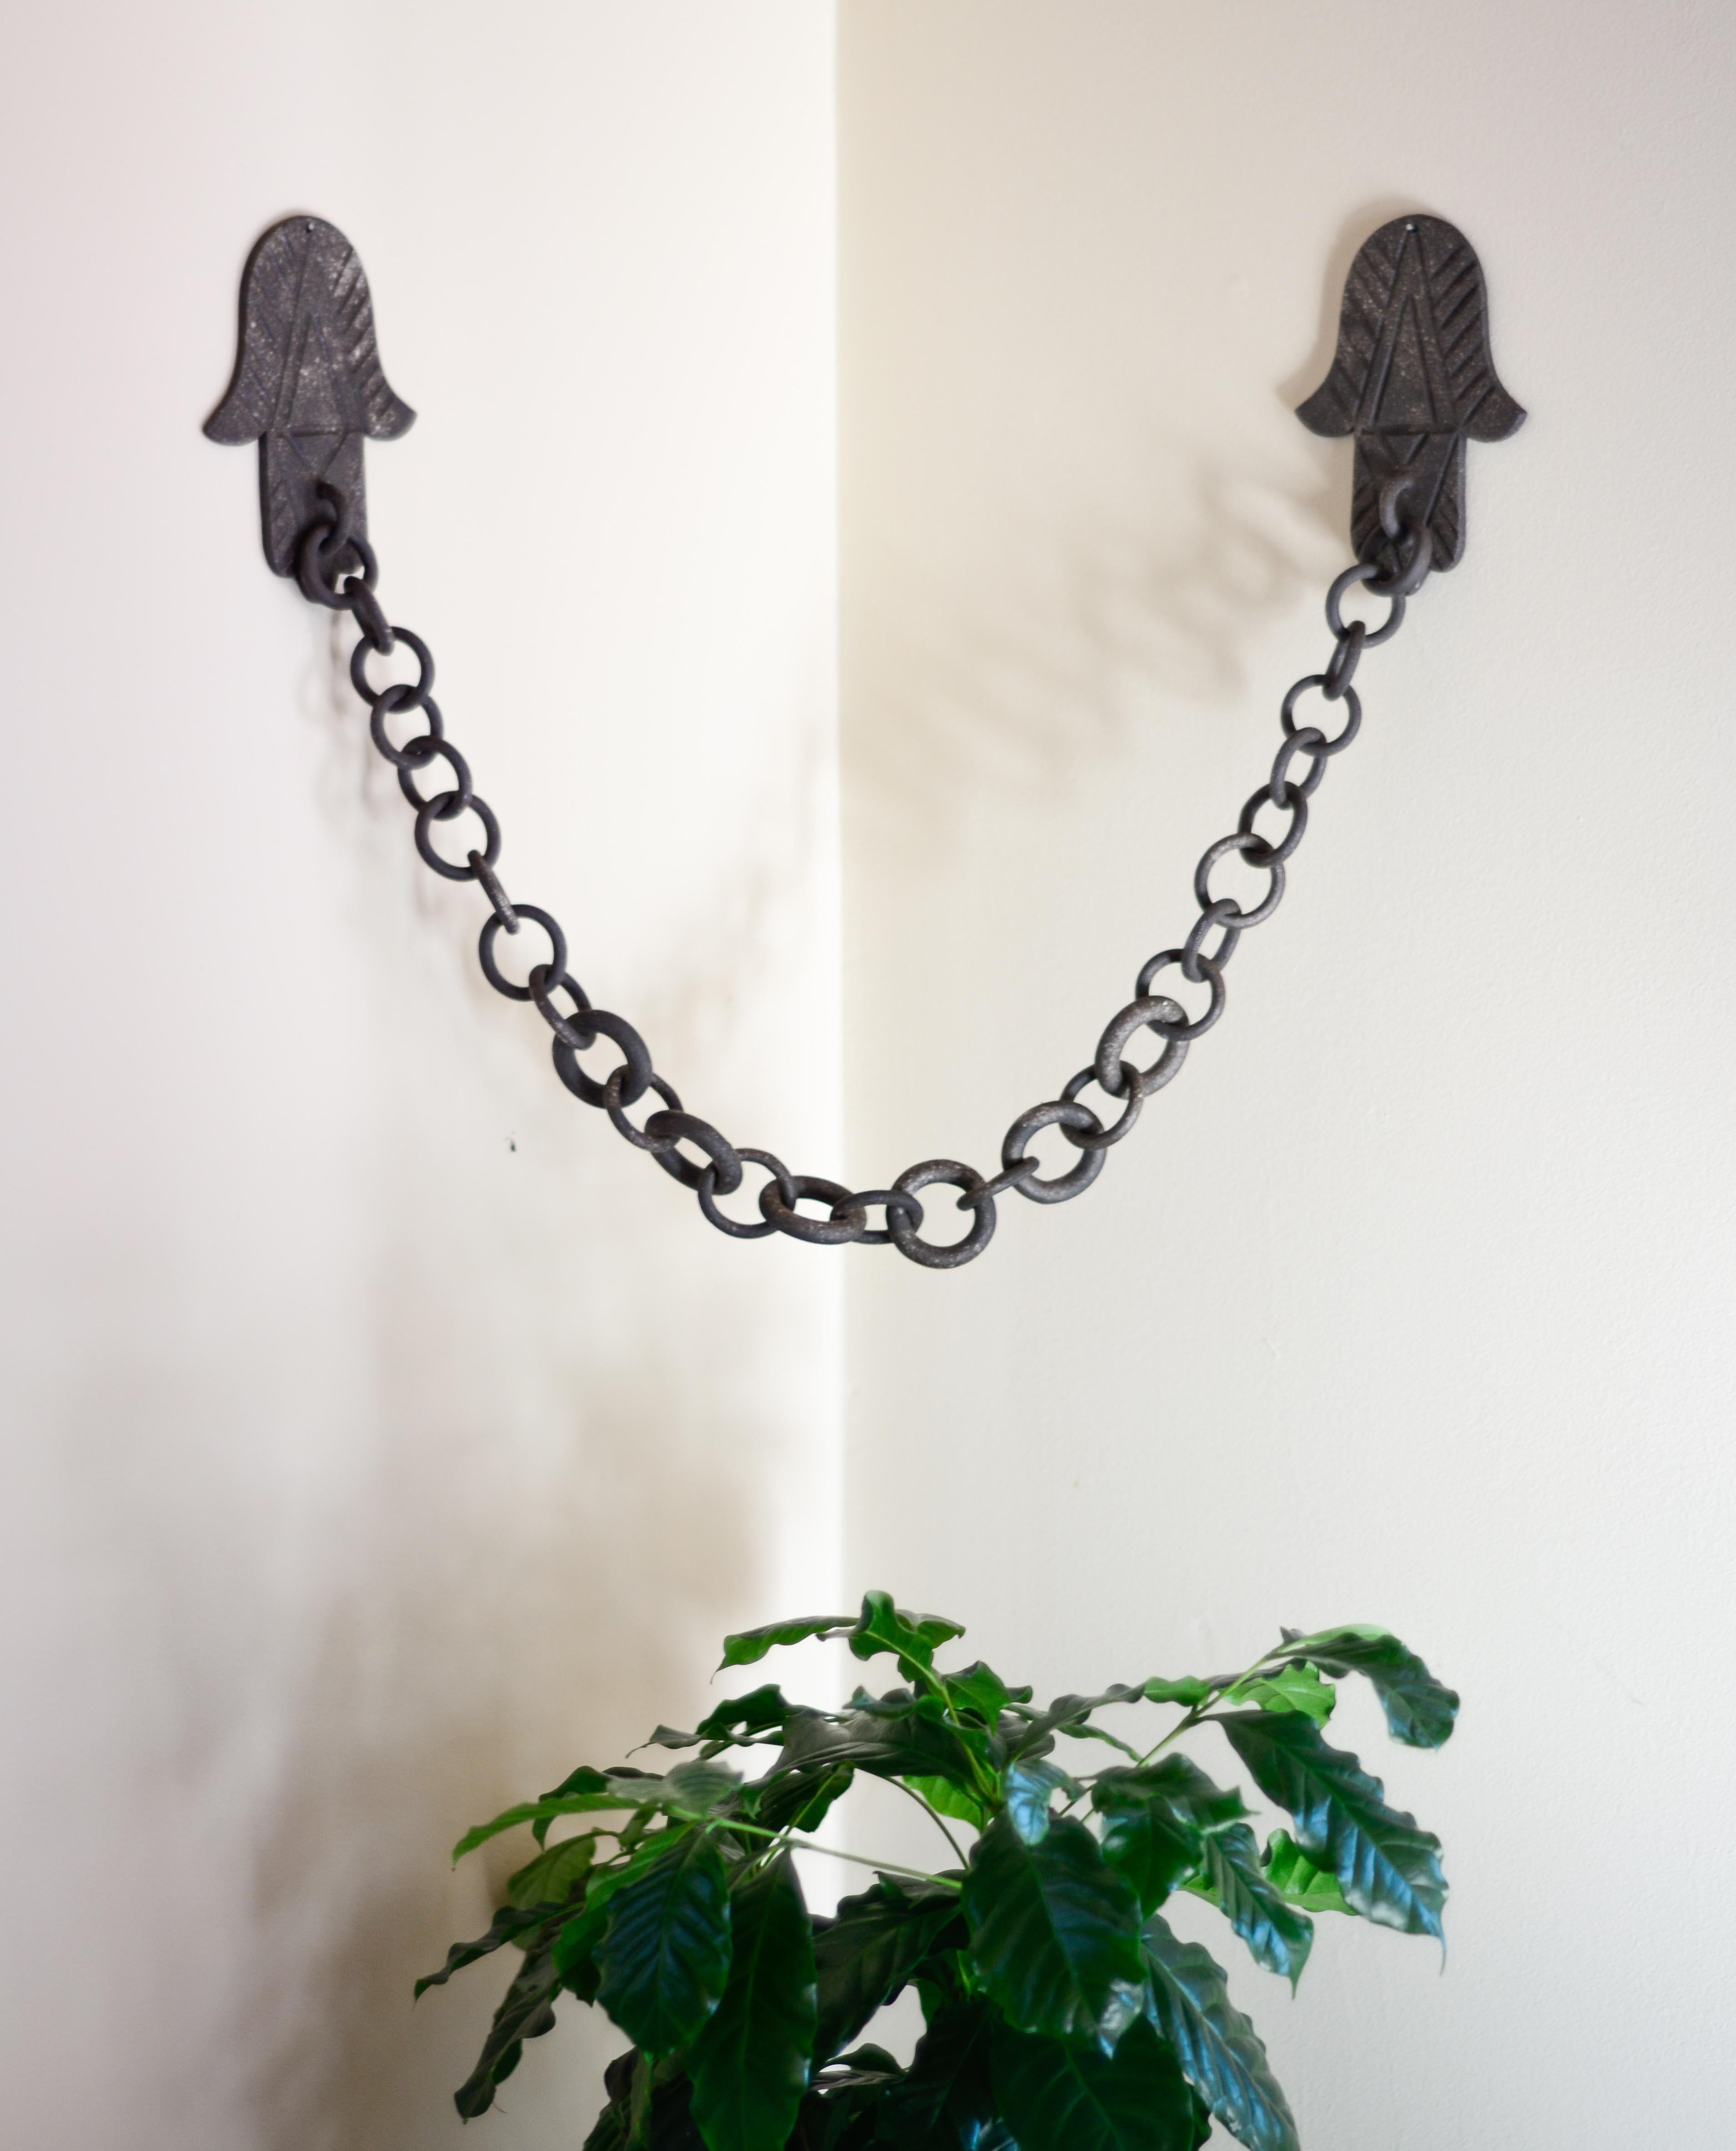 Tribal Ceramic Hand Link Chain Wall Sculpture by Asmaa Aman Tran